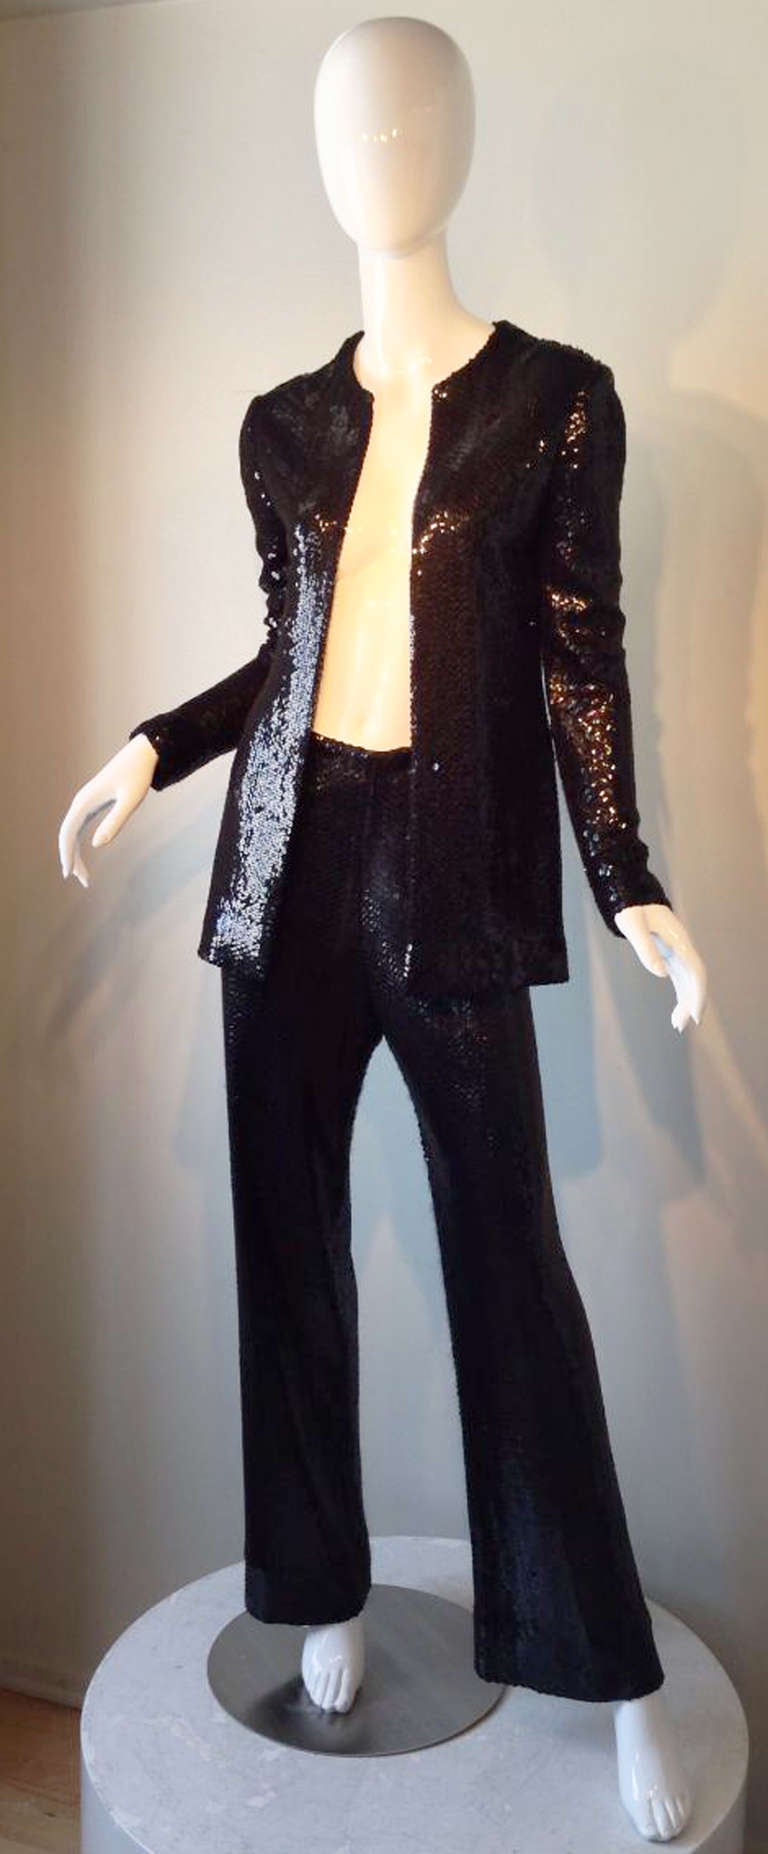 A fine and rare vintage Halston sequin trouser suit. Iconic jet black silk jersey items completely covered in black sequins. Jacket features a open front (no closures). Matching trousers feature a elastic waist and side zipper. Pristine appears